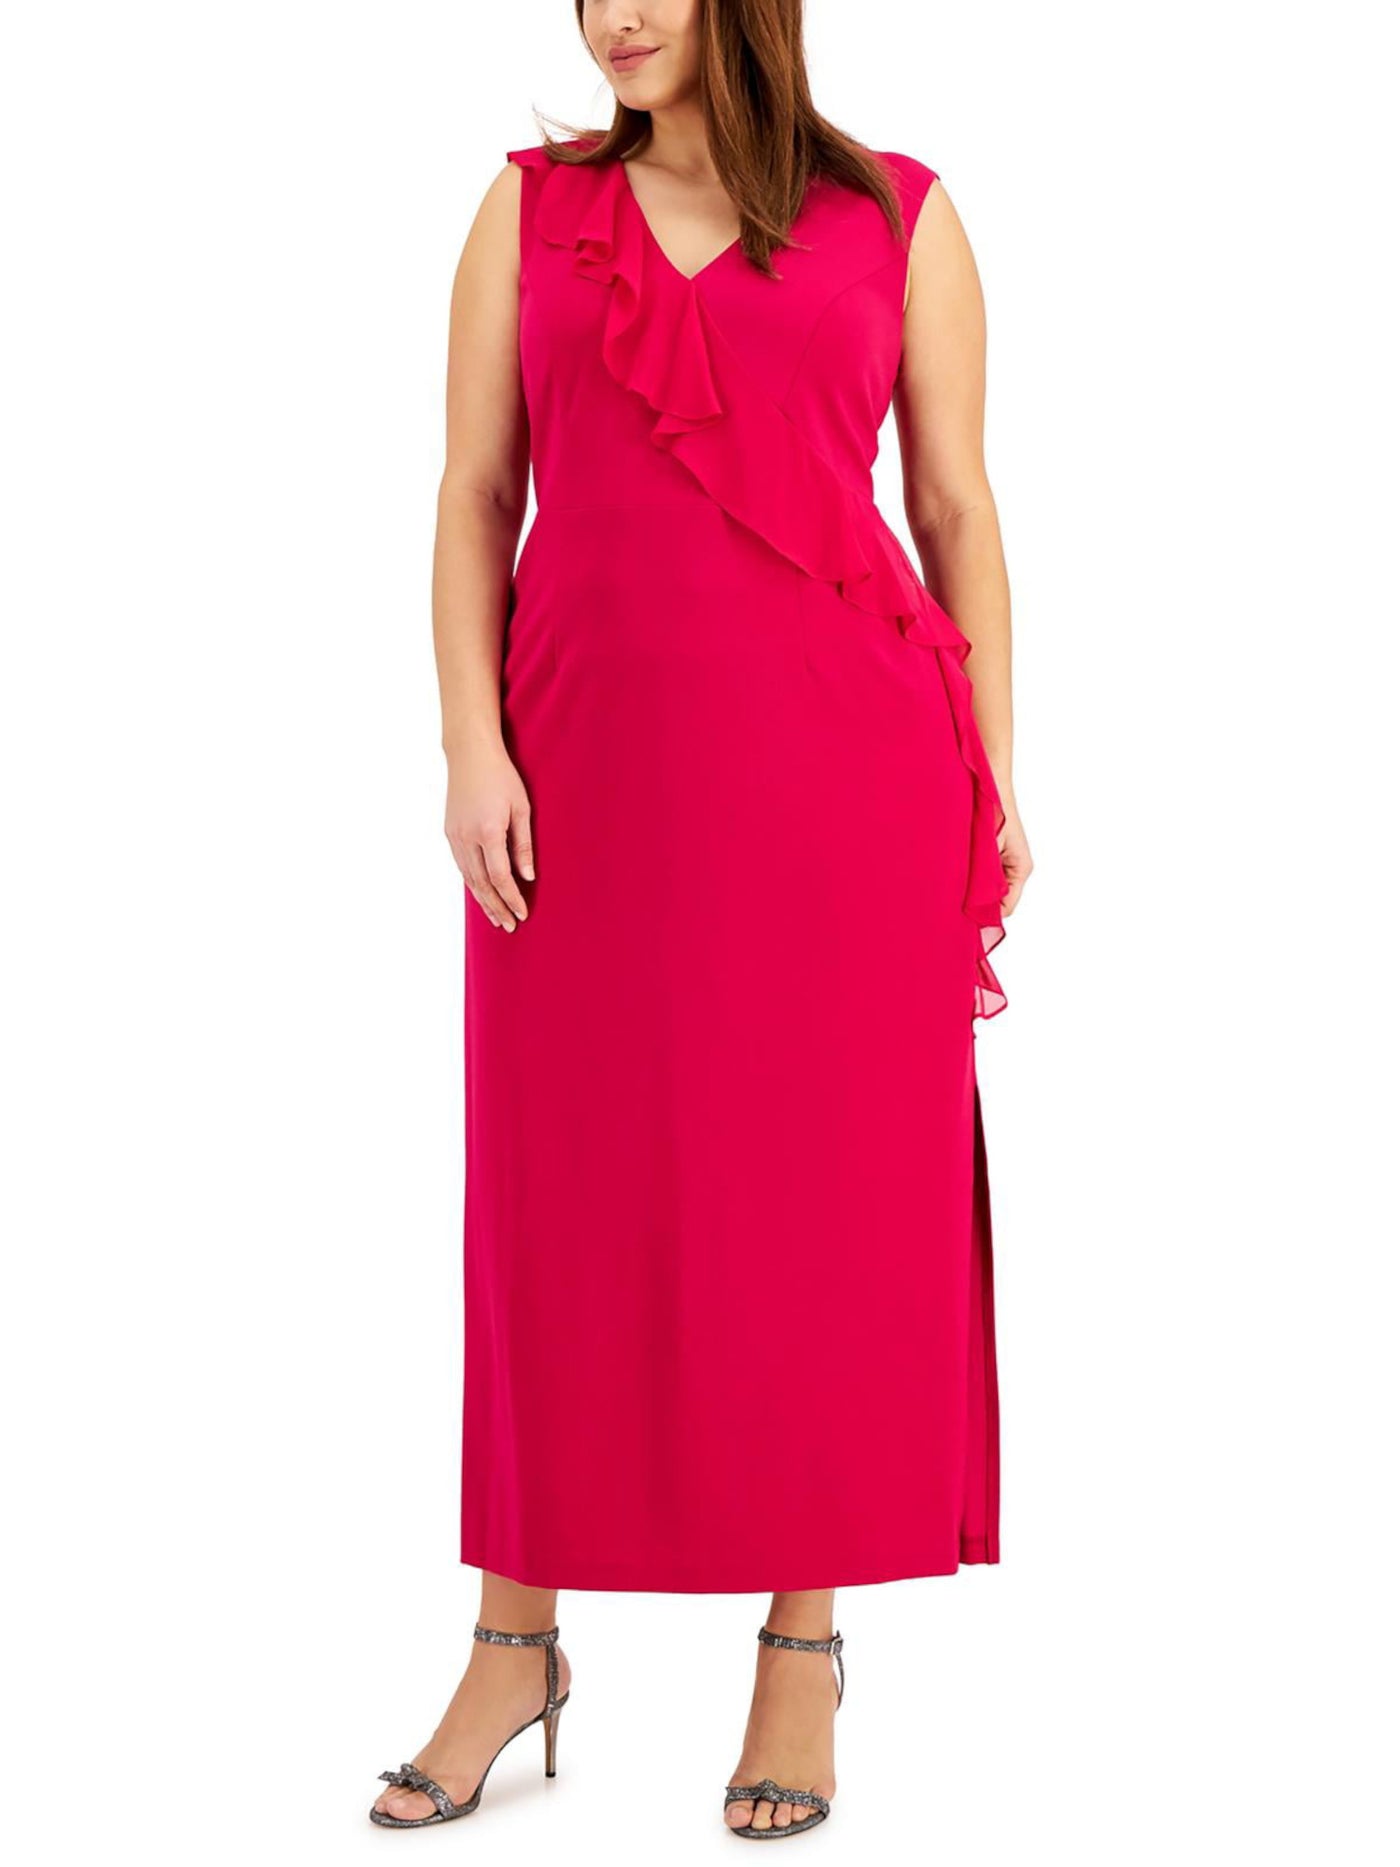 CONNECTED APPAREL Womens Pink Stretch Ruffled Zippered Slitted Sheer Lined Bodice Sleeveless V Neck Maxi Fit + Flare Dress Plus 22W